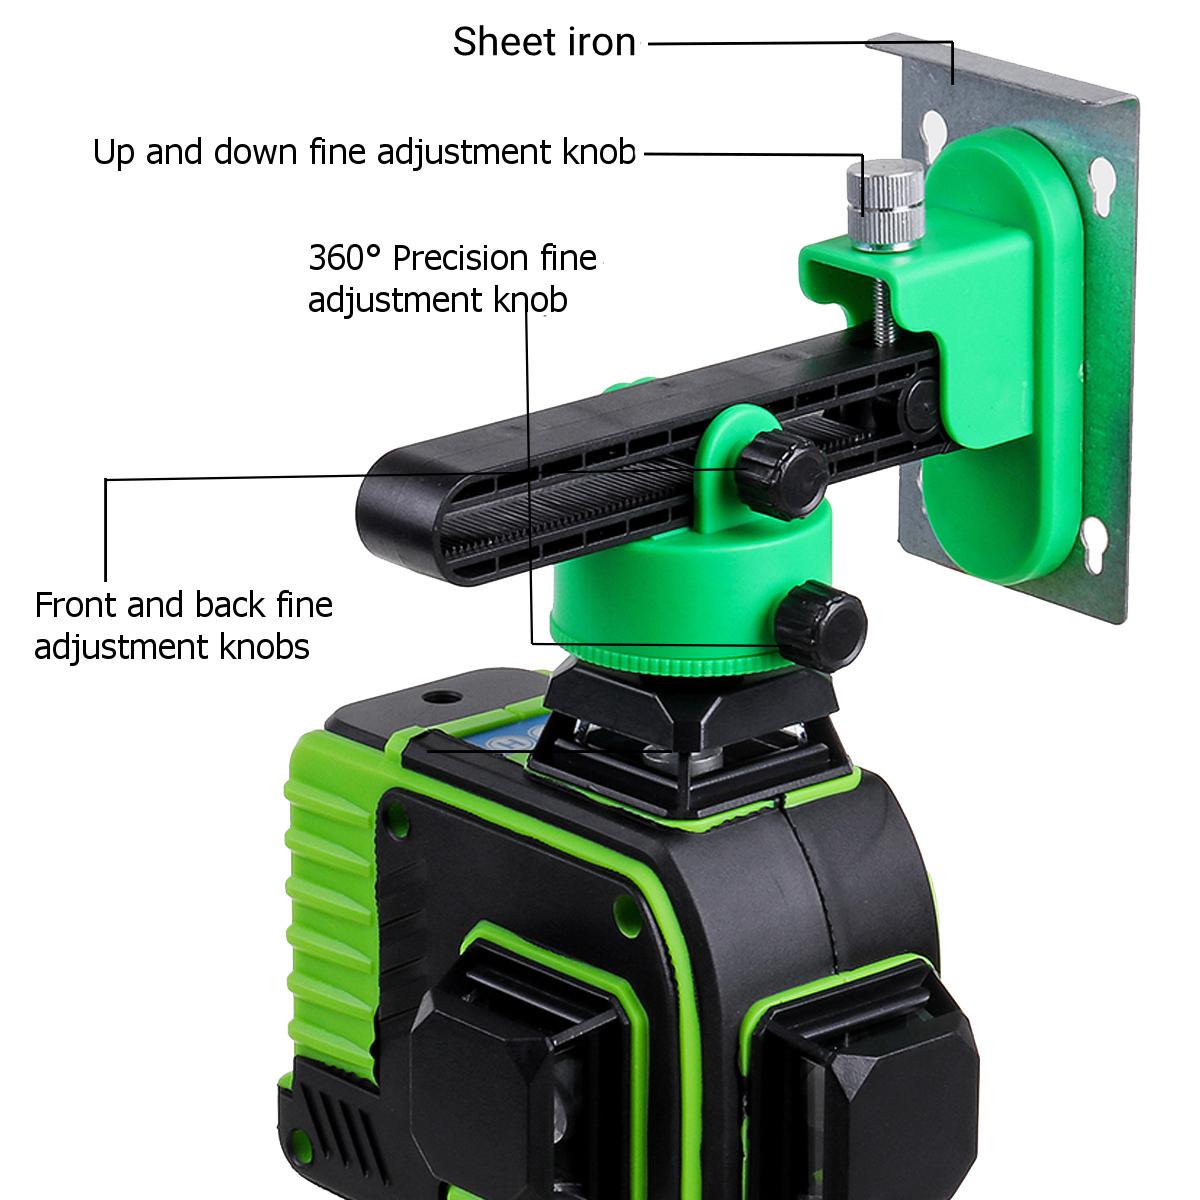 4D-16-Lines-Green-Light-Laser-Levels--360deg-Self-Rotary-Leveling-Measure-Tools-with-2PCS-Lithium-Ba-1941453-10